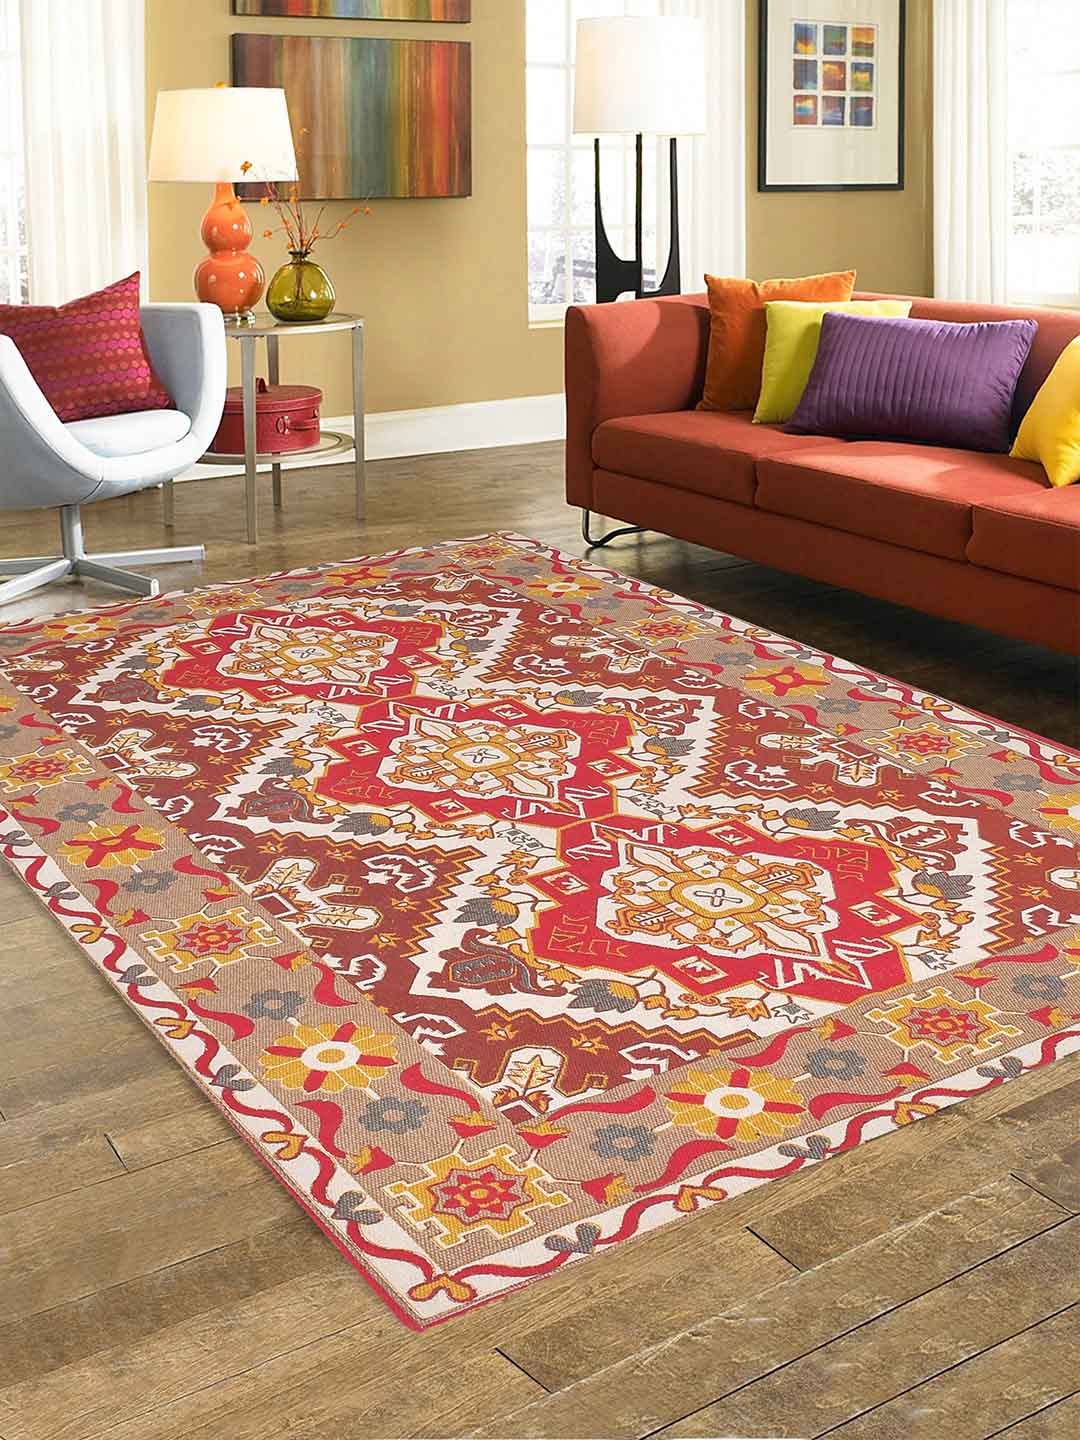 Udaipur Rusty Red Printed 4'x5.5' Cotton Carpet